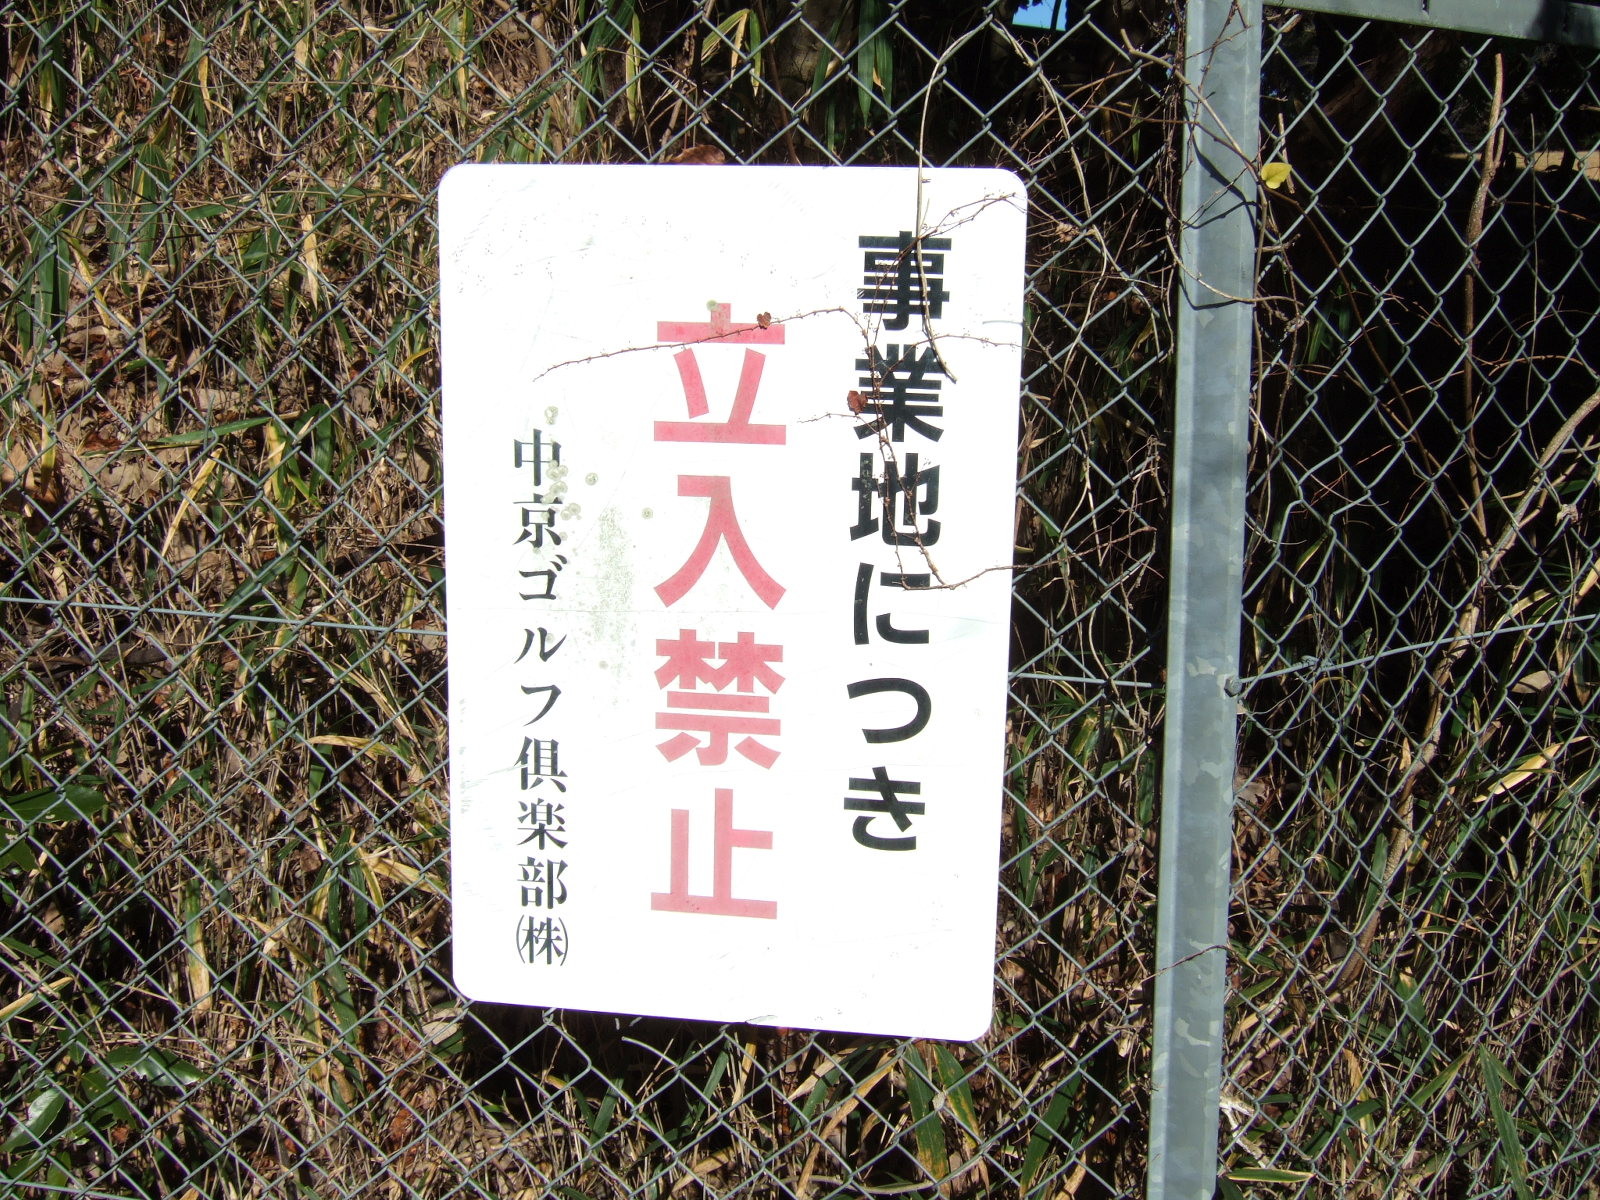 A sign reading “Entry to these grounds is prohibited/Chukyo Golf Club, Inc.” (事業地につき・立入禁止・中京ゴルフクラブ(株).